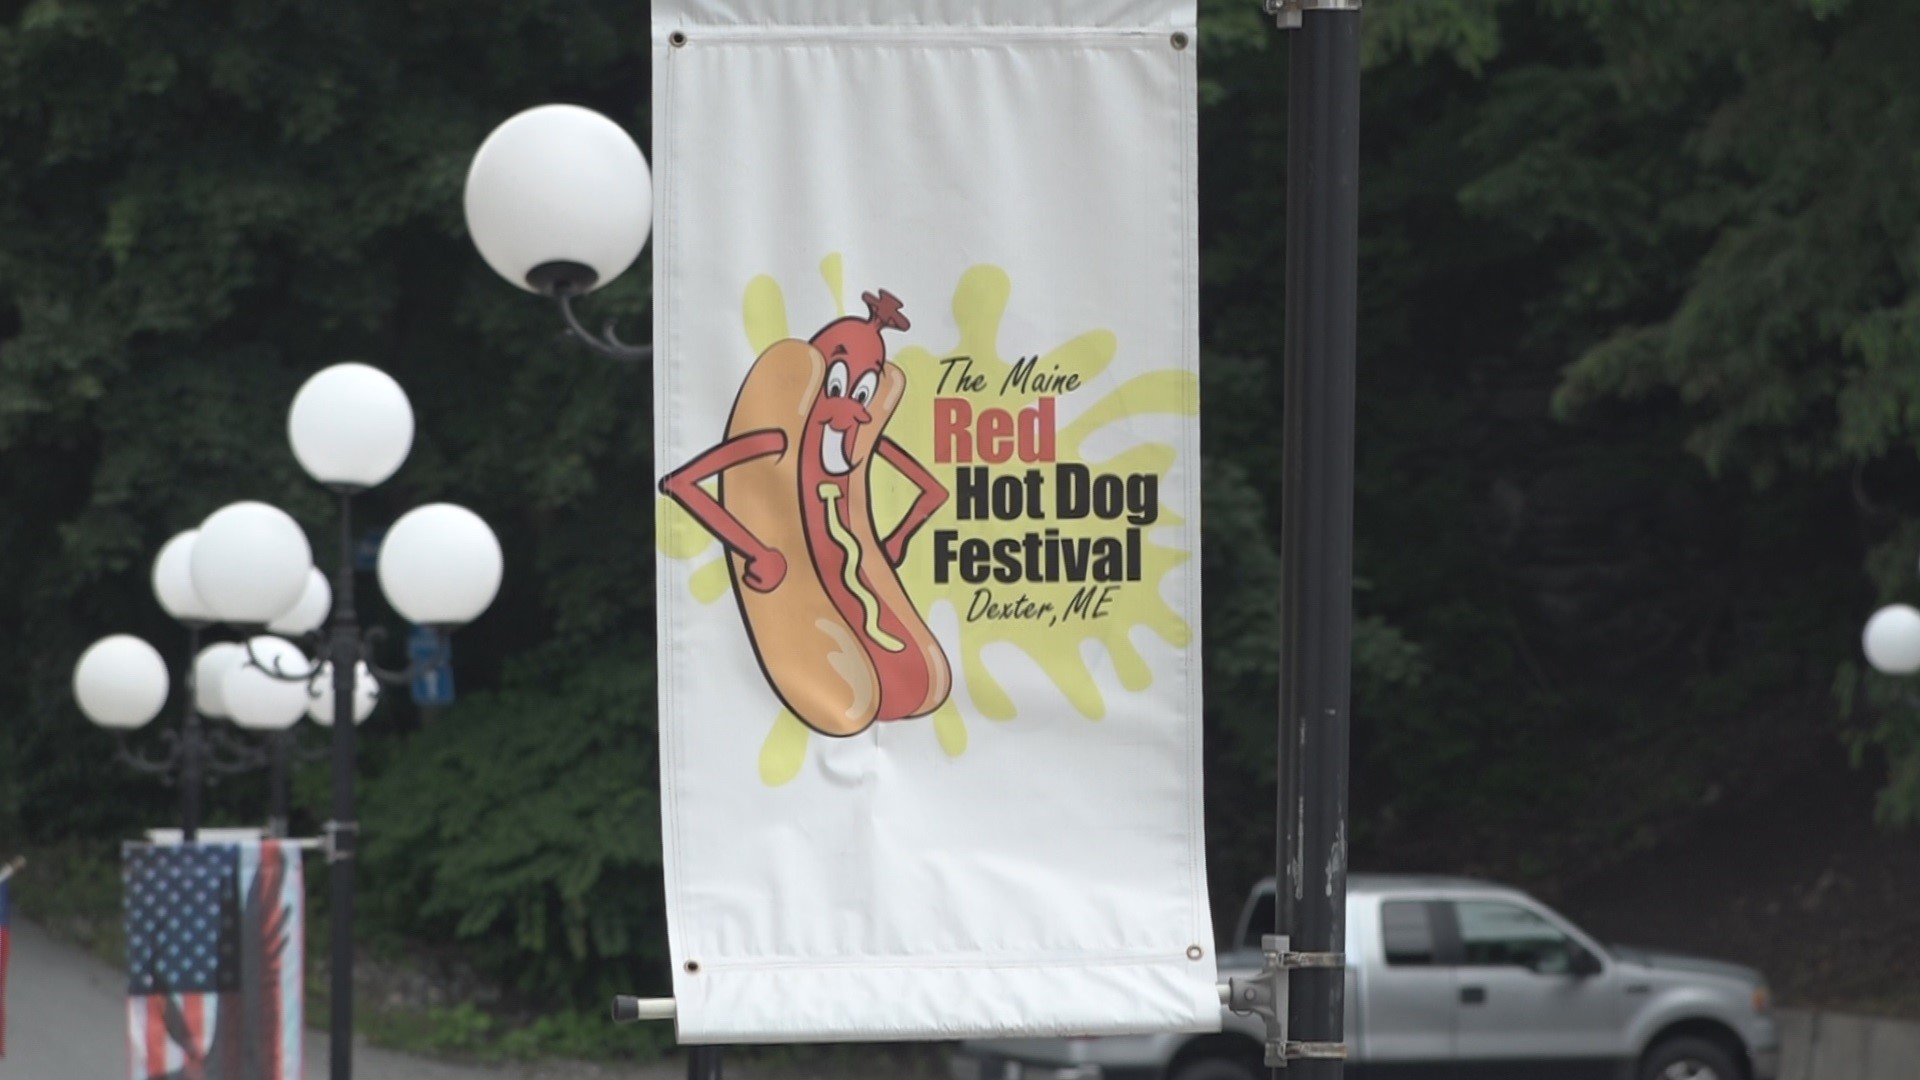 The Red Hot Dog Festival will run from 10 a.m. to 7 p.m. rain or shine in downtown Dexter